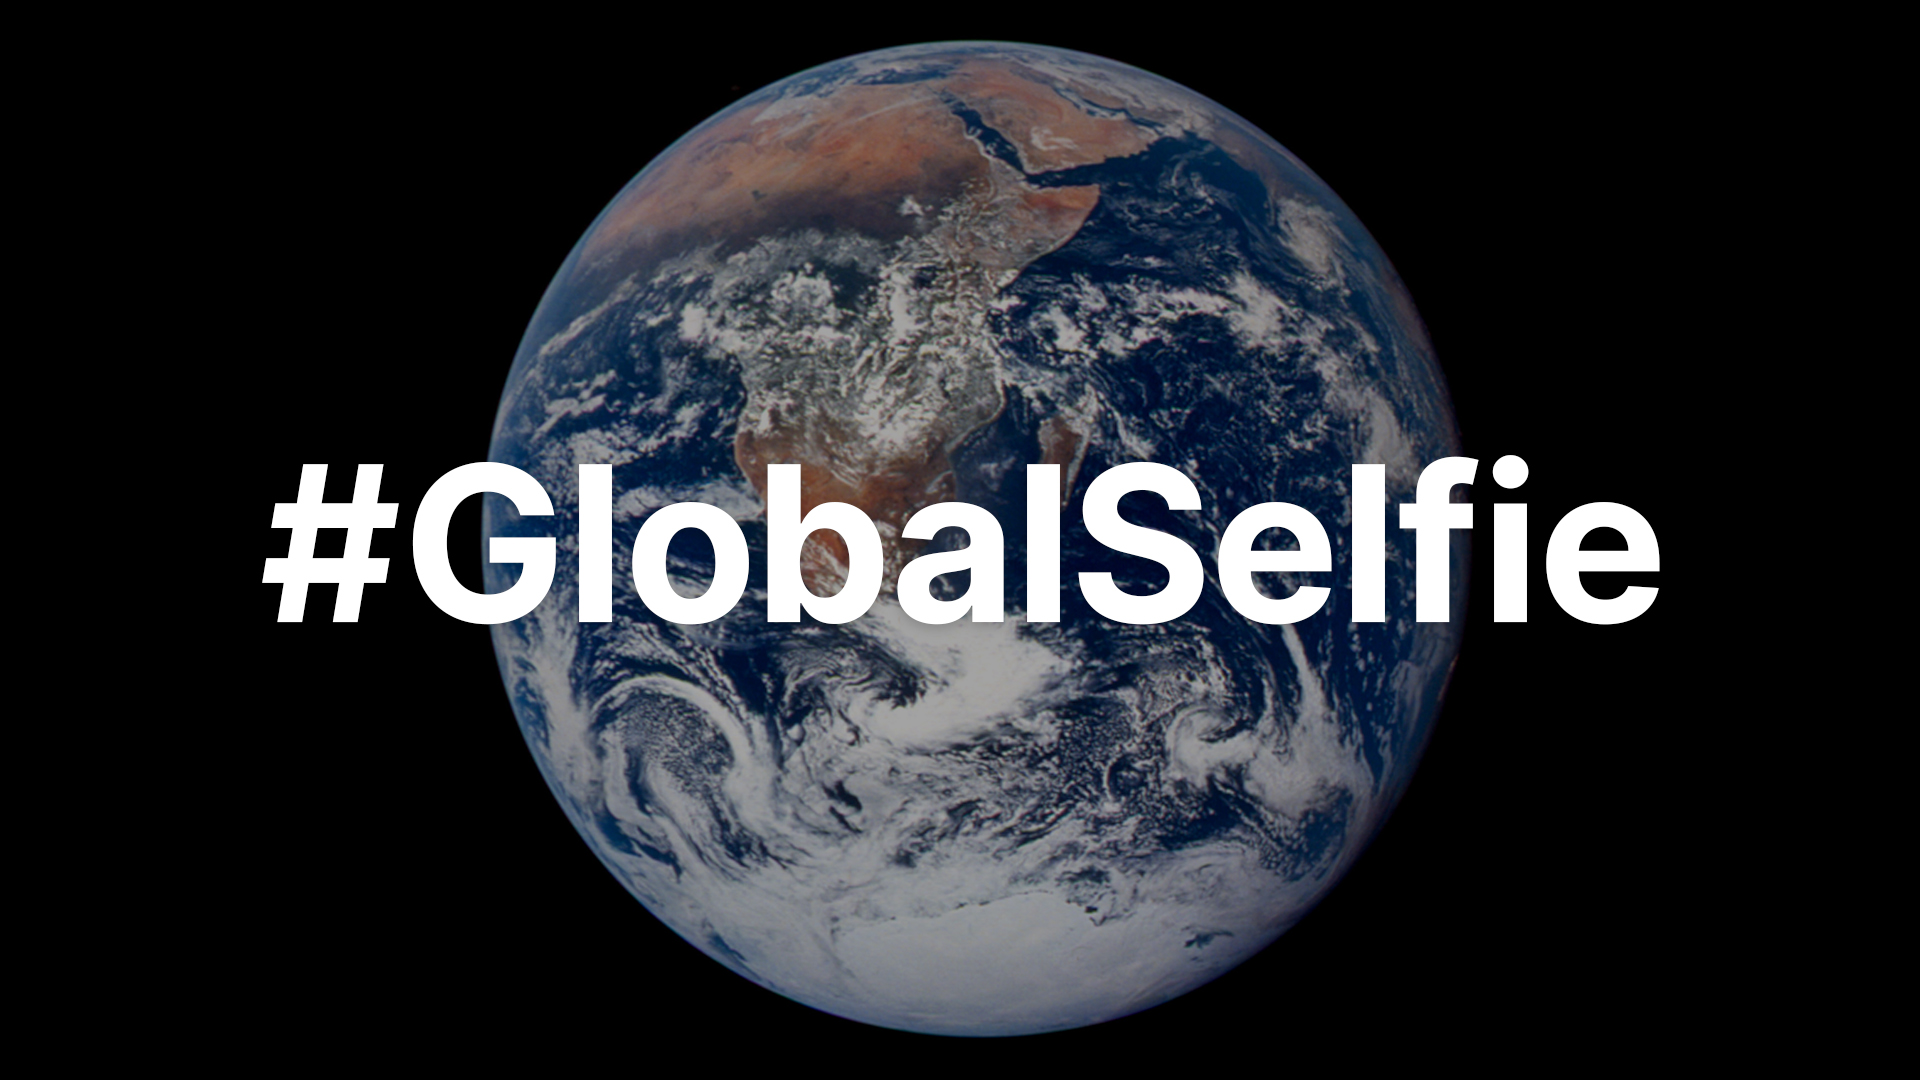 The globe of the Earth is visible against a black background. Overlaid in white lettering is 